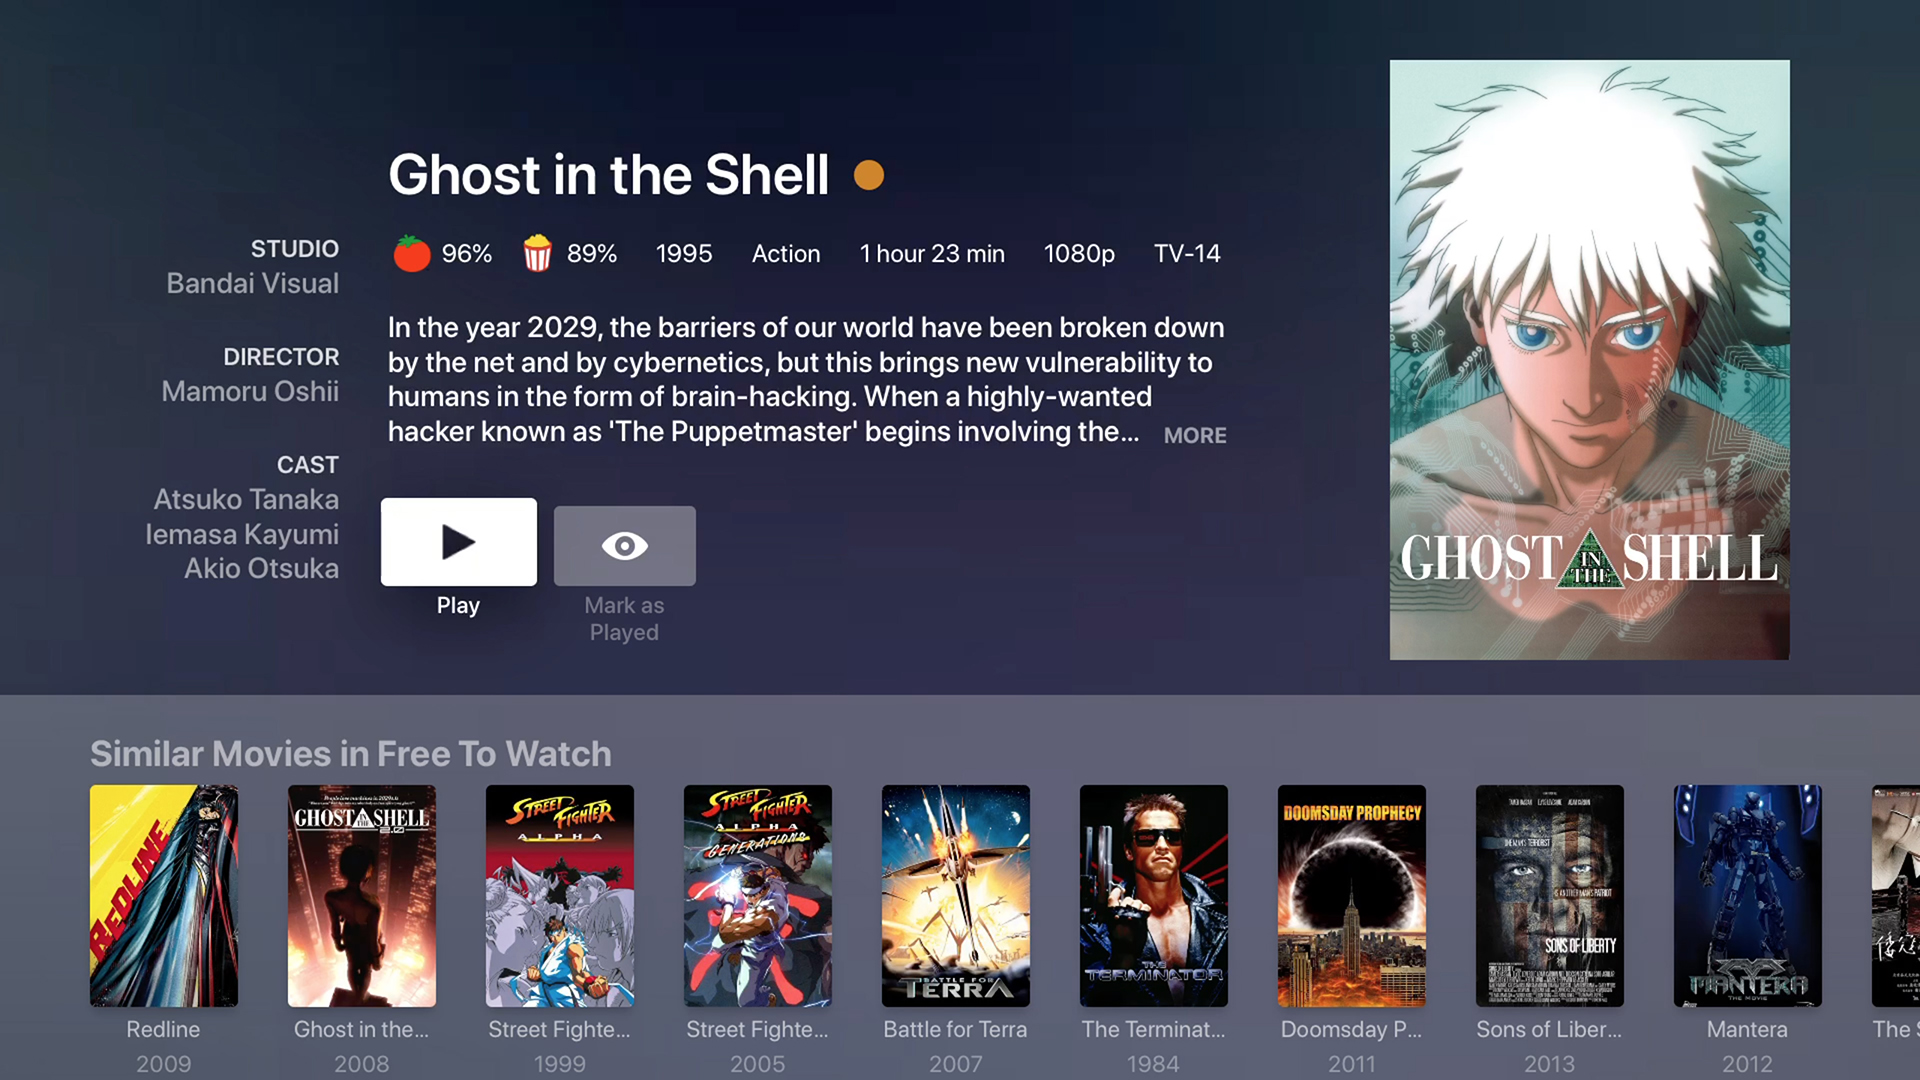 Plex Video On DEmand Example streaming apps and services